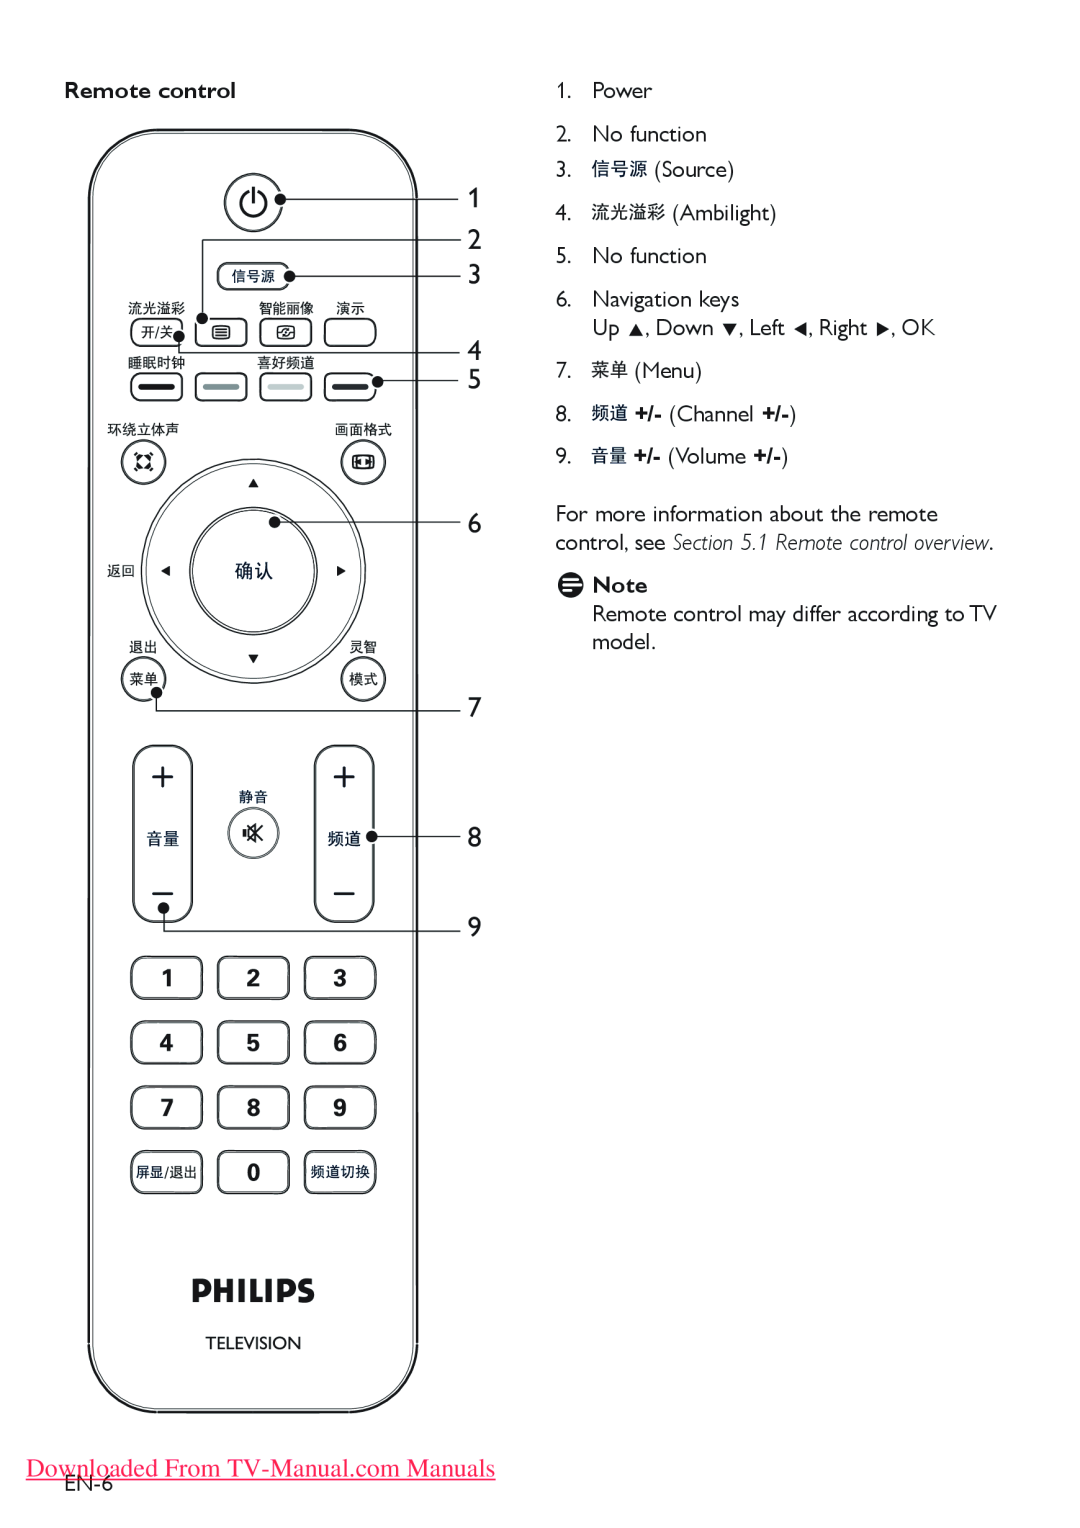 Philips 52PFL7403 1 2 3 4 5 6 7, Remote control, Downloaded From TV-Manual.comManuals, No function 6.Navigation keys 